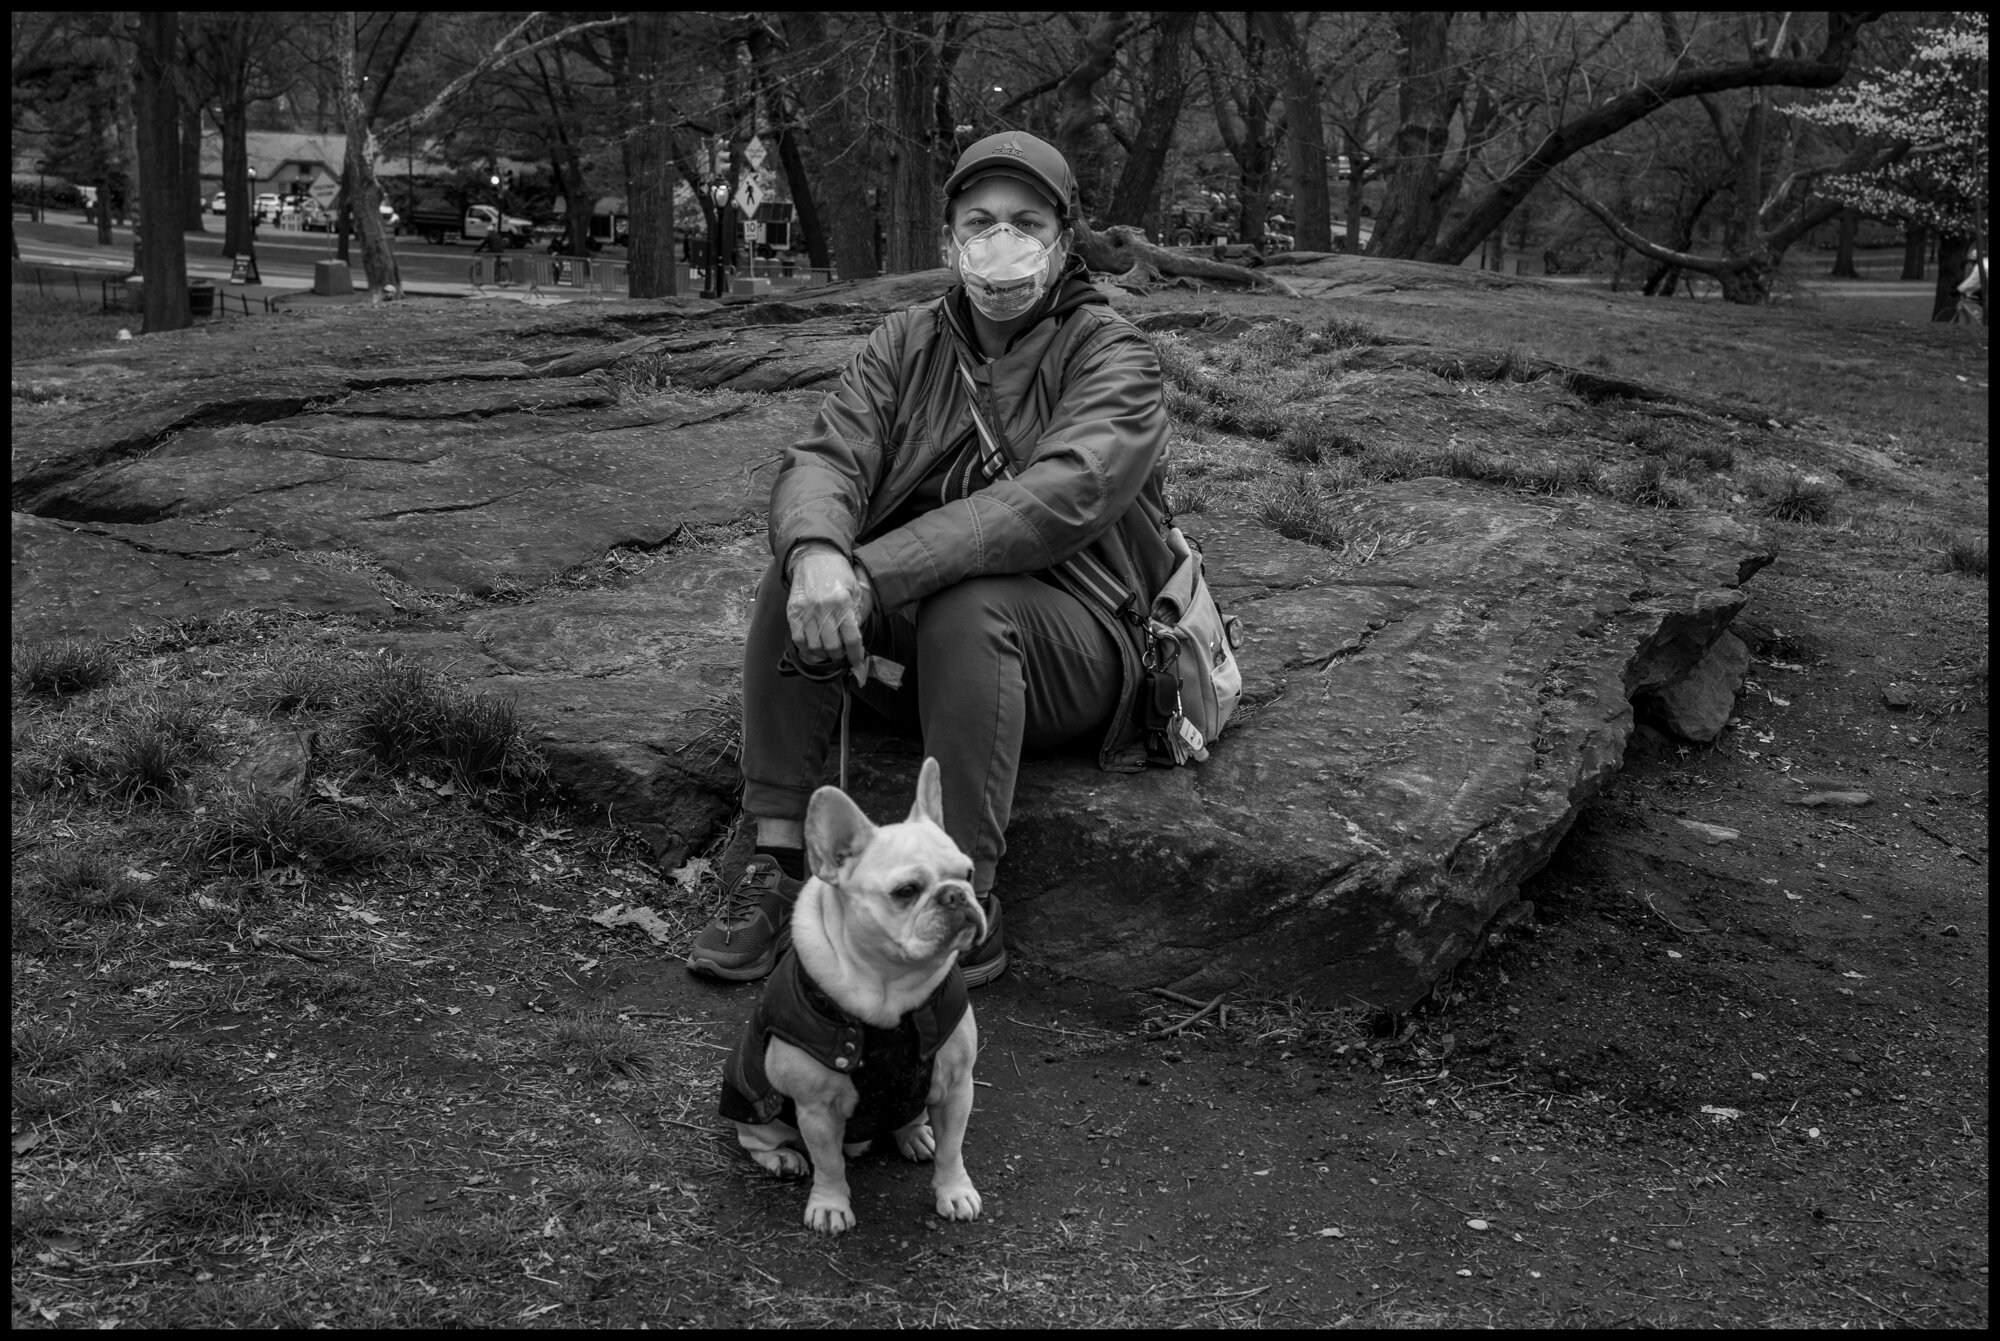  Nancy, and Sky, the dog. French bulldog Sky was a model for Coach when she was 4 months. "We're not doing great. We heard on the news that is a lot worse than they were thinking. Somebody 39 died today-healthy. Sky's life has changed-she notices thi